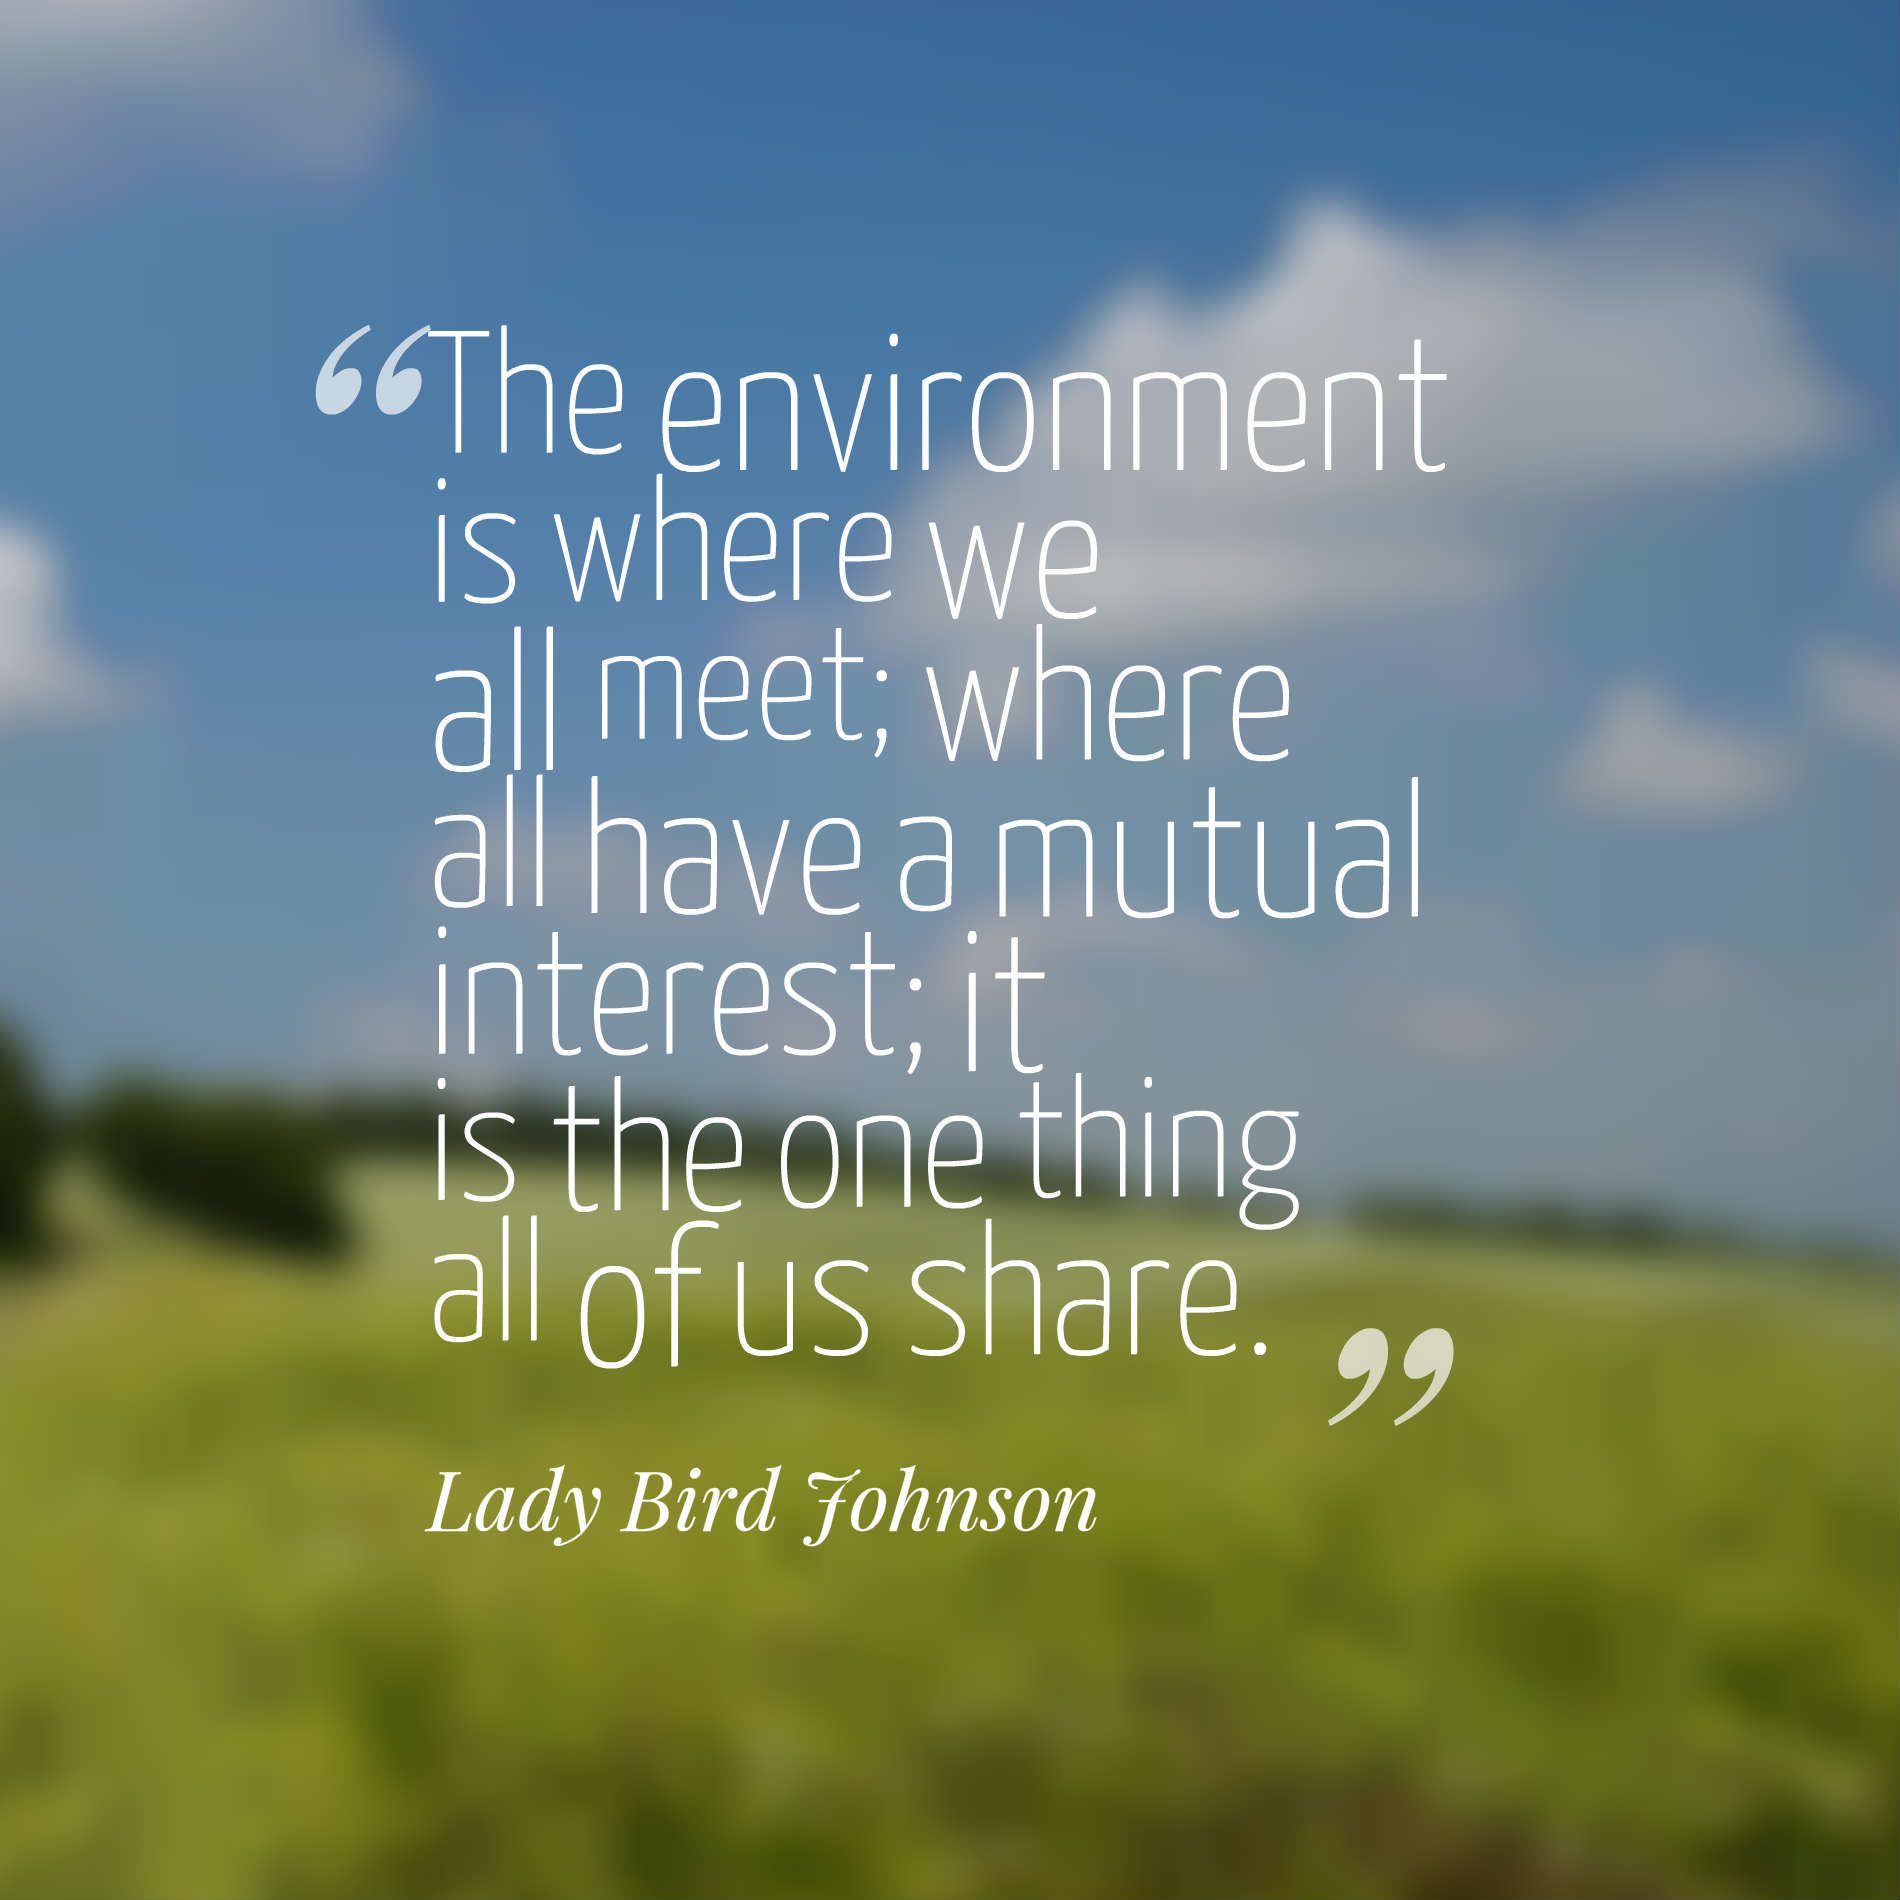 The environment is where we all meet; where all have a mutual interest; it is the one thing all of us share.